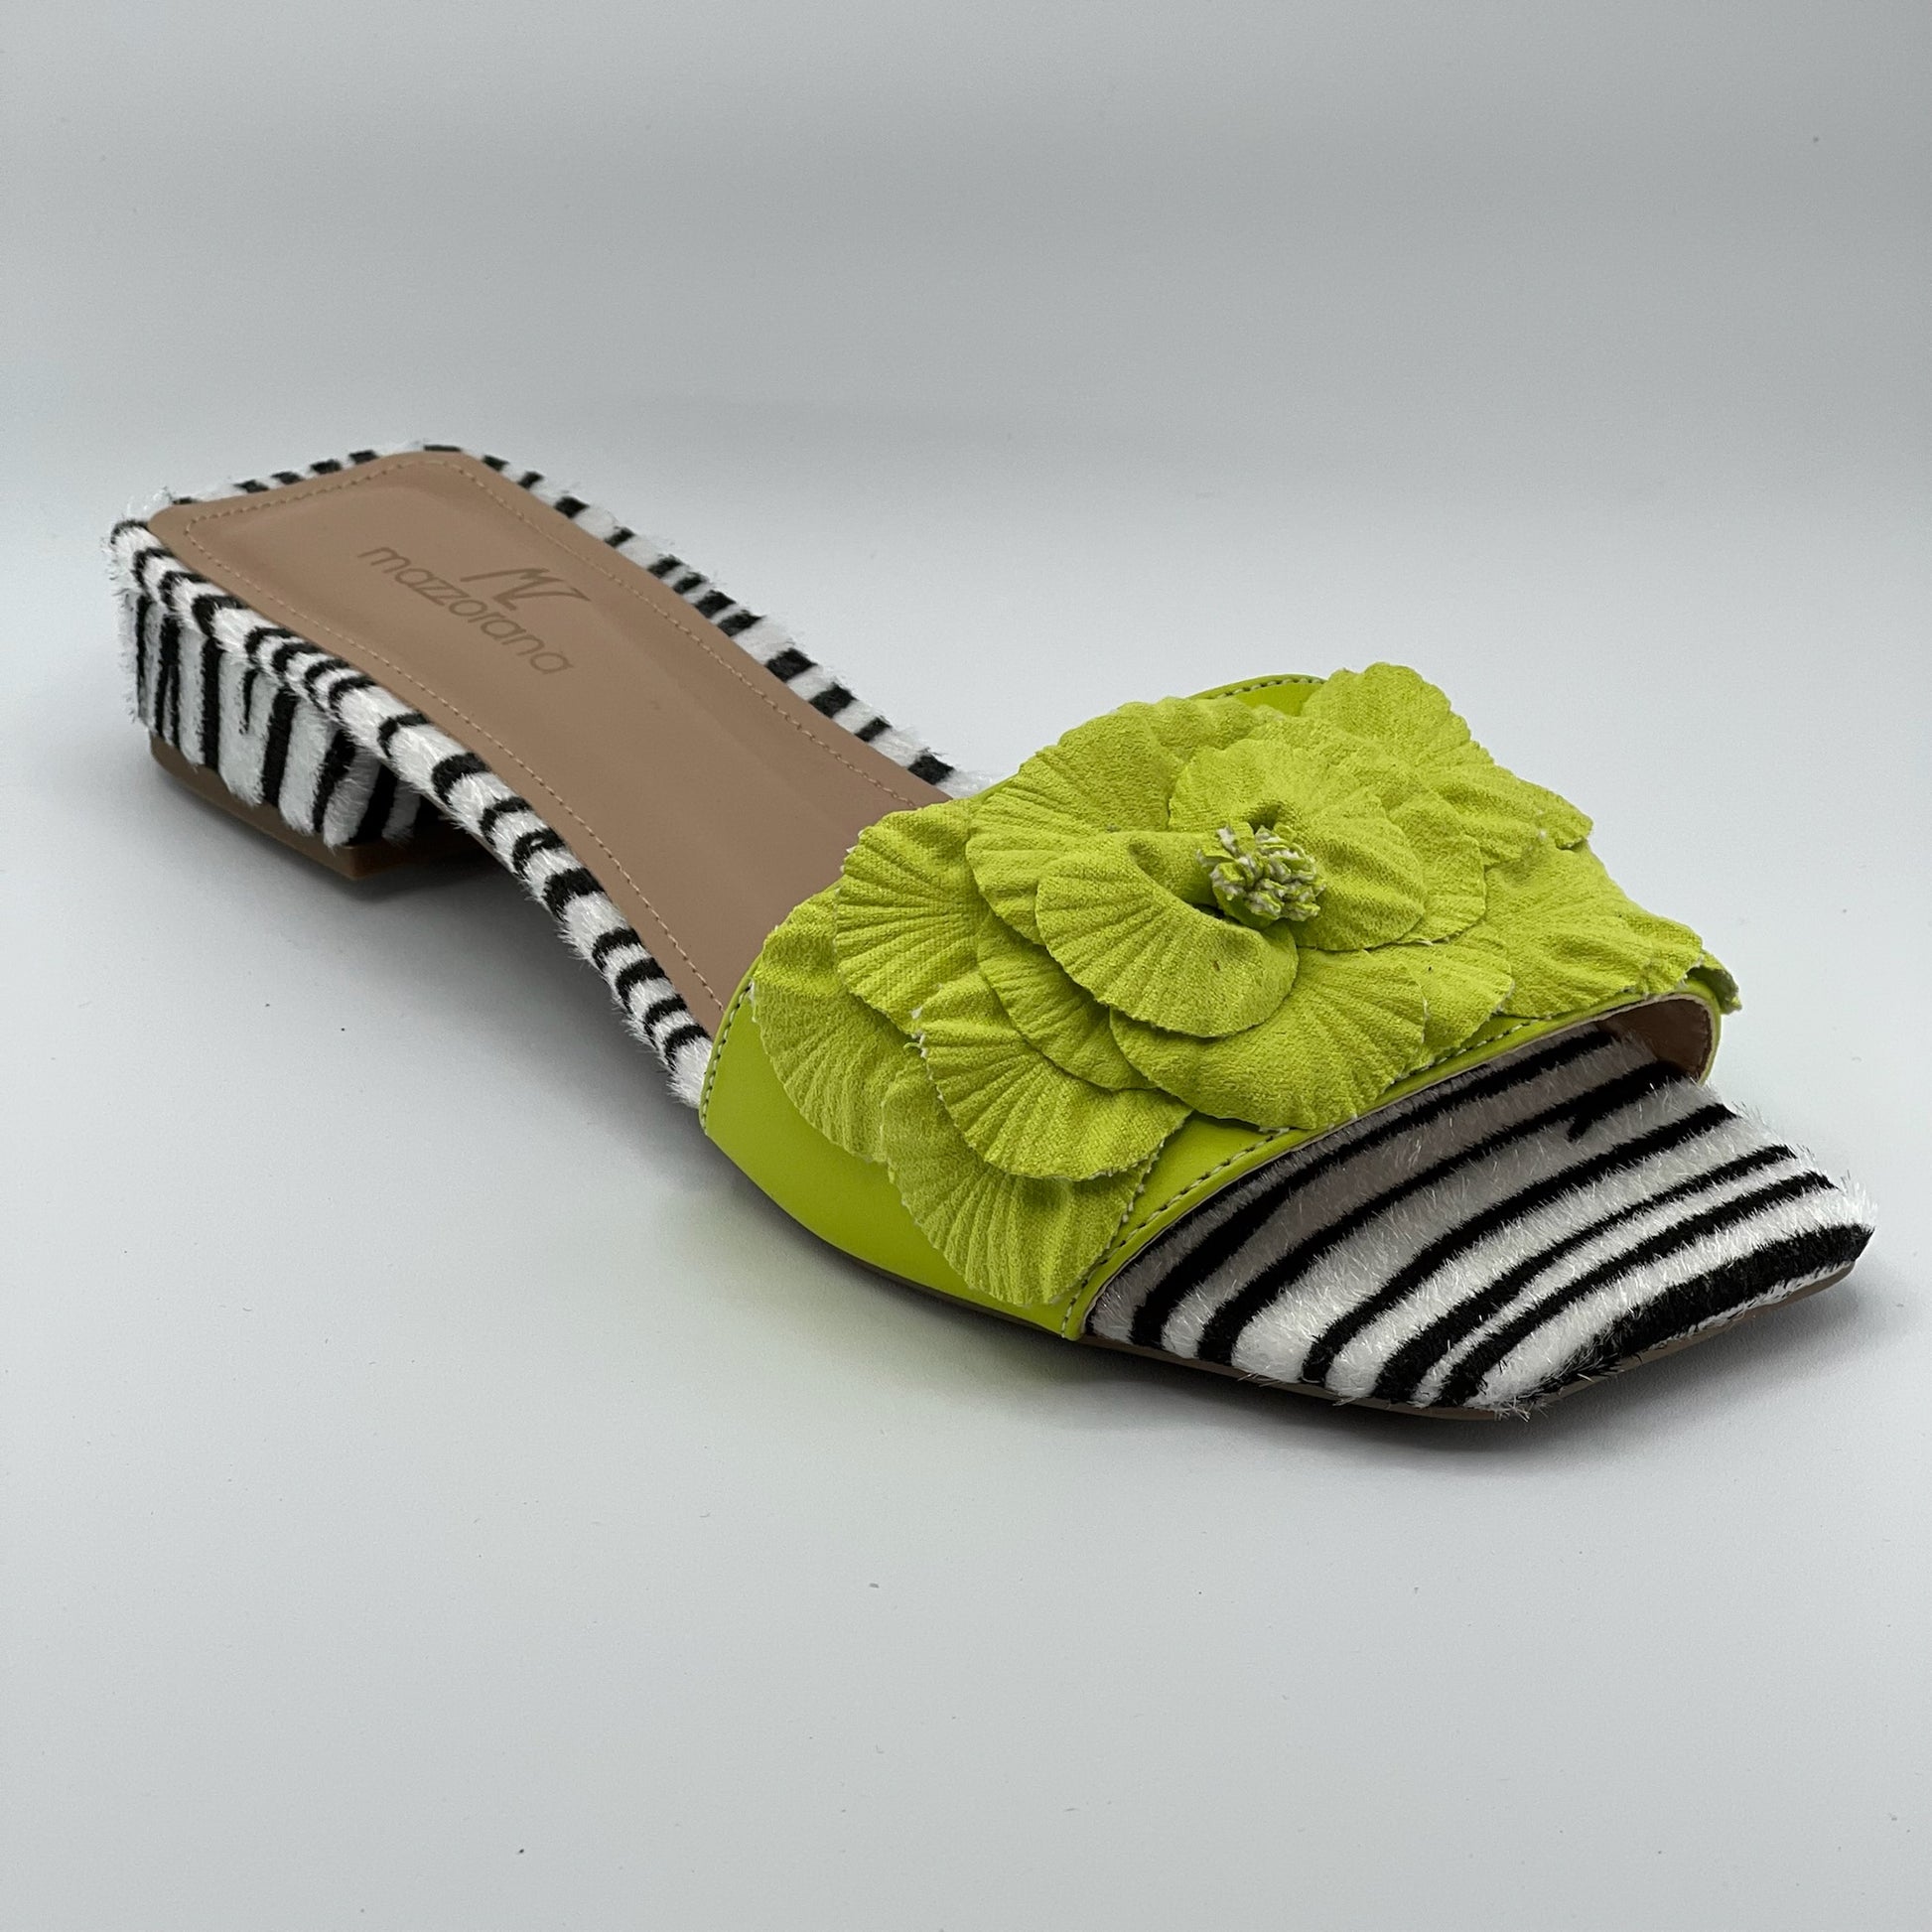 Flat shoes, zebra bottom with Napa lime siciliano thick top strap, ADORA